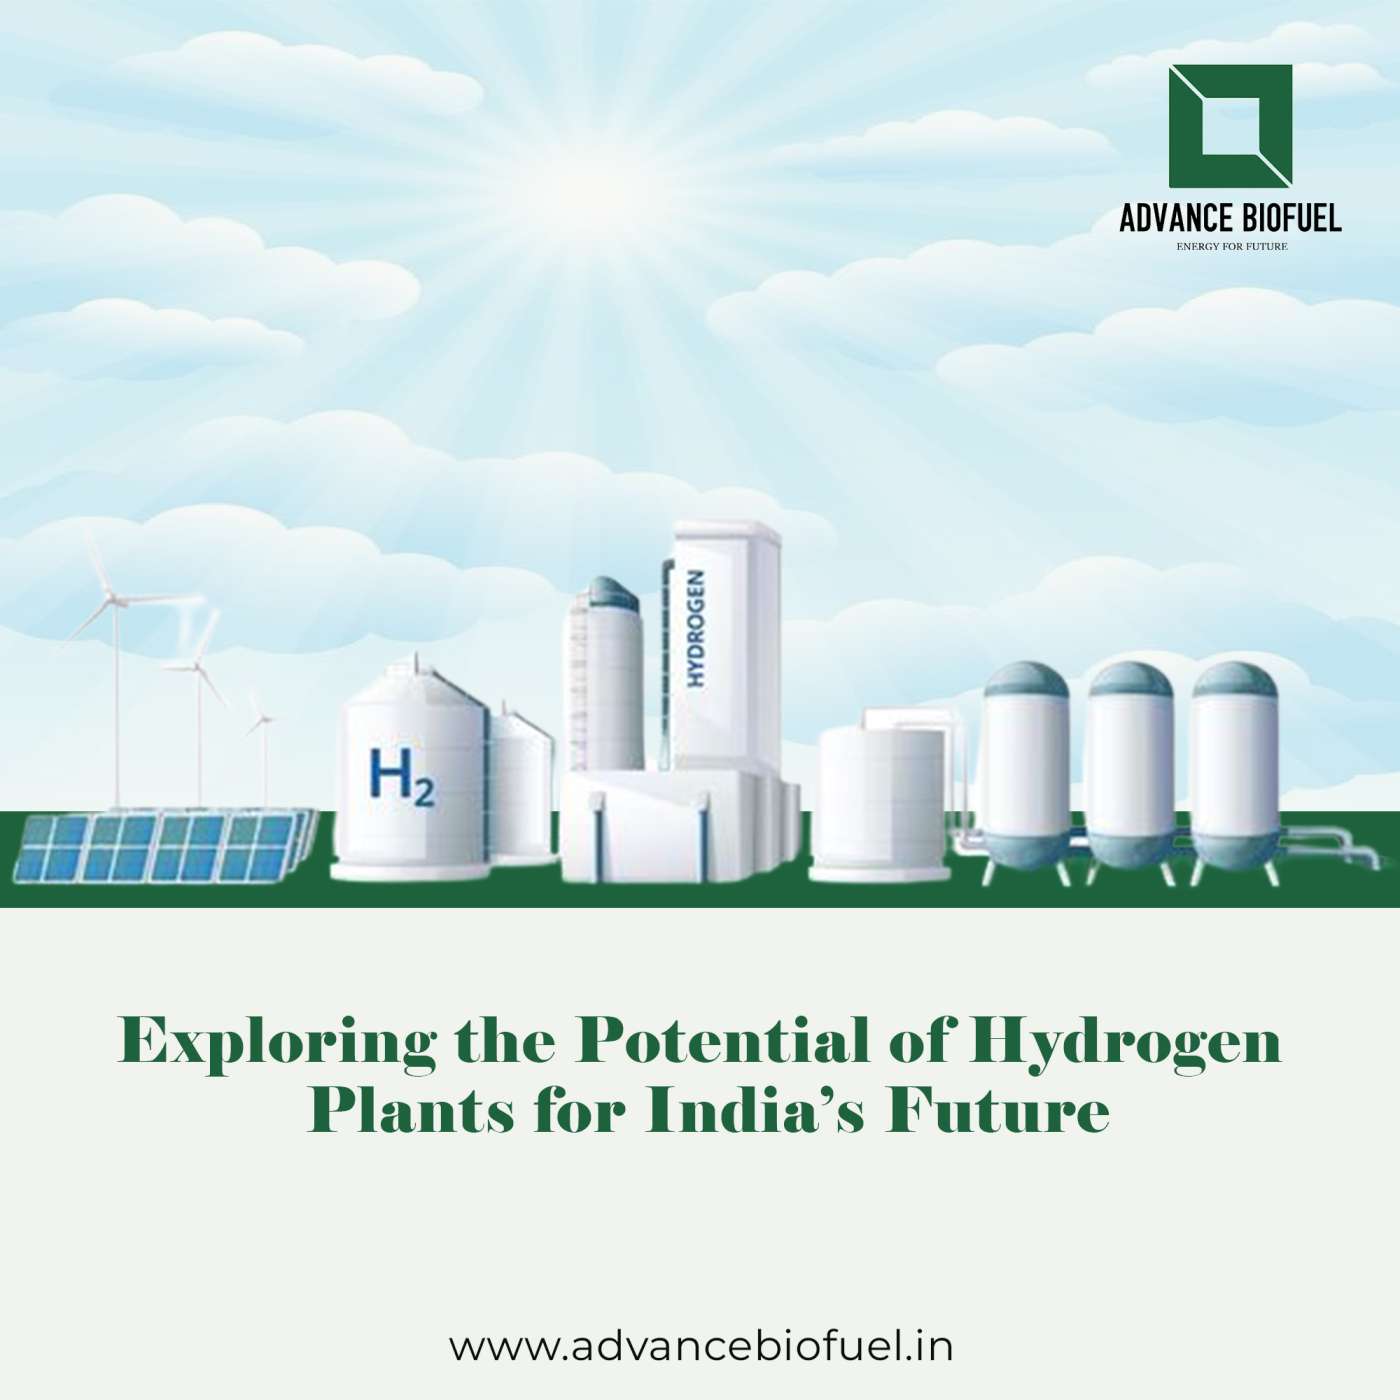 Exploring the Potential of Hydrogen Plants for India’s Future